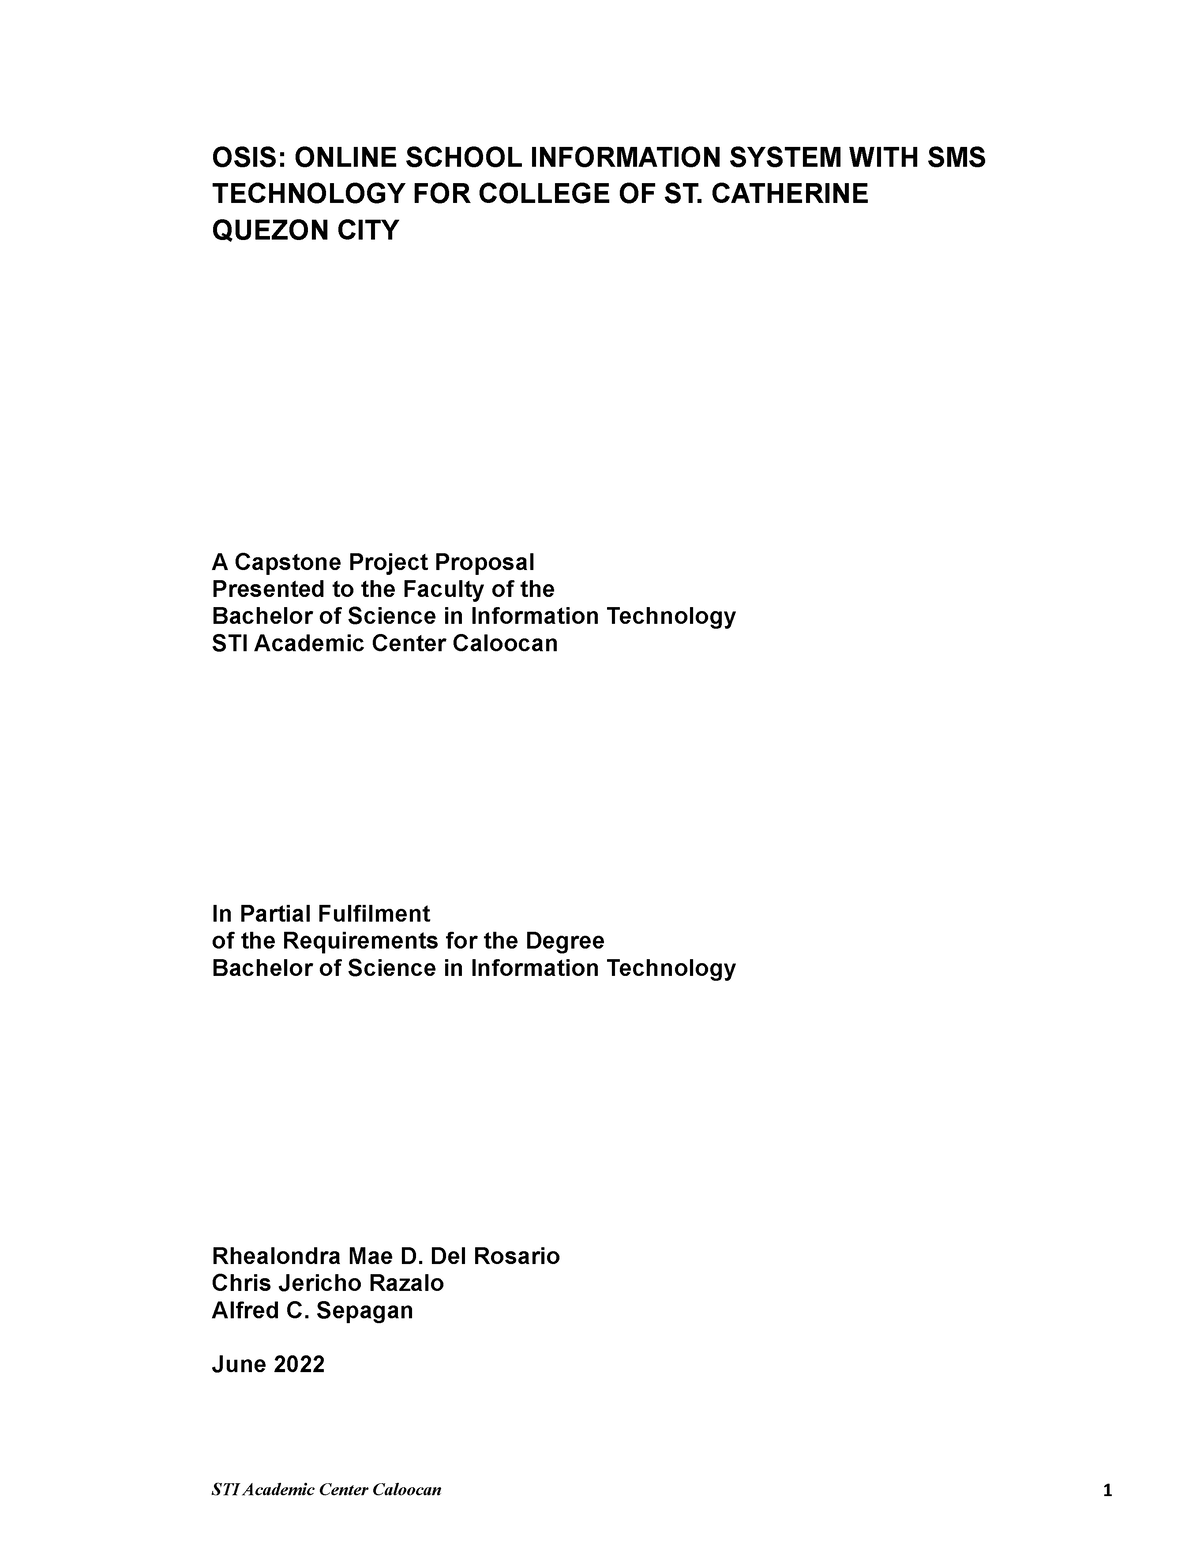 capstone project title proposal for information technology